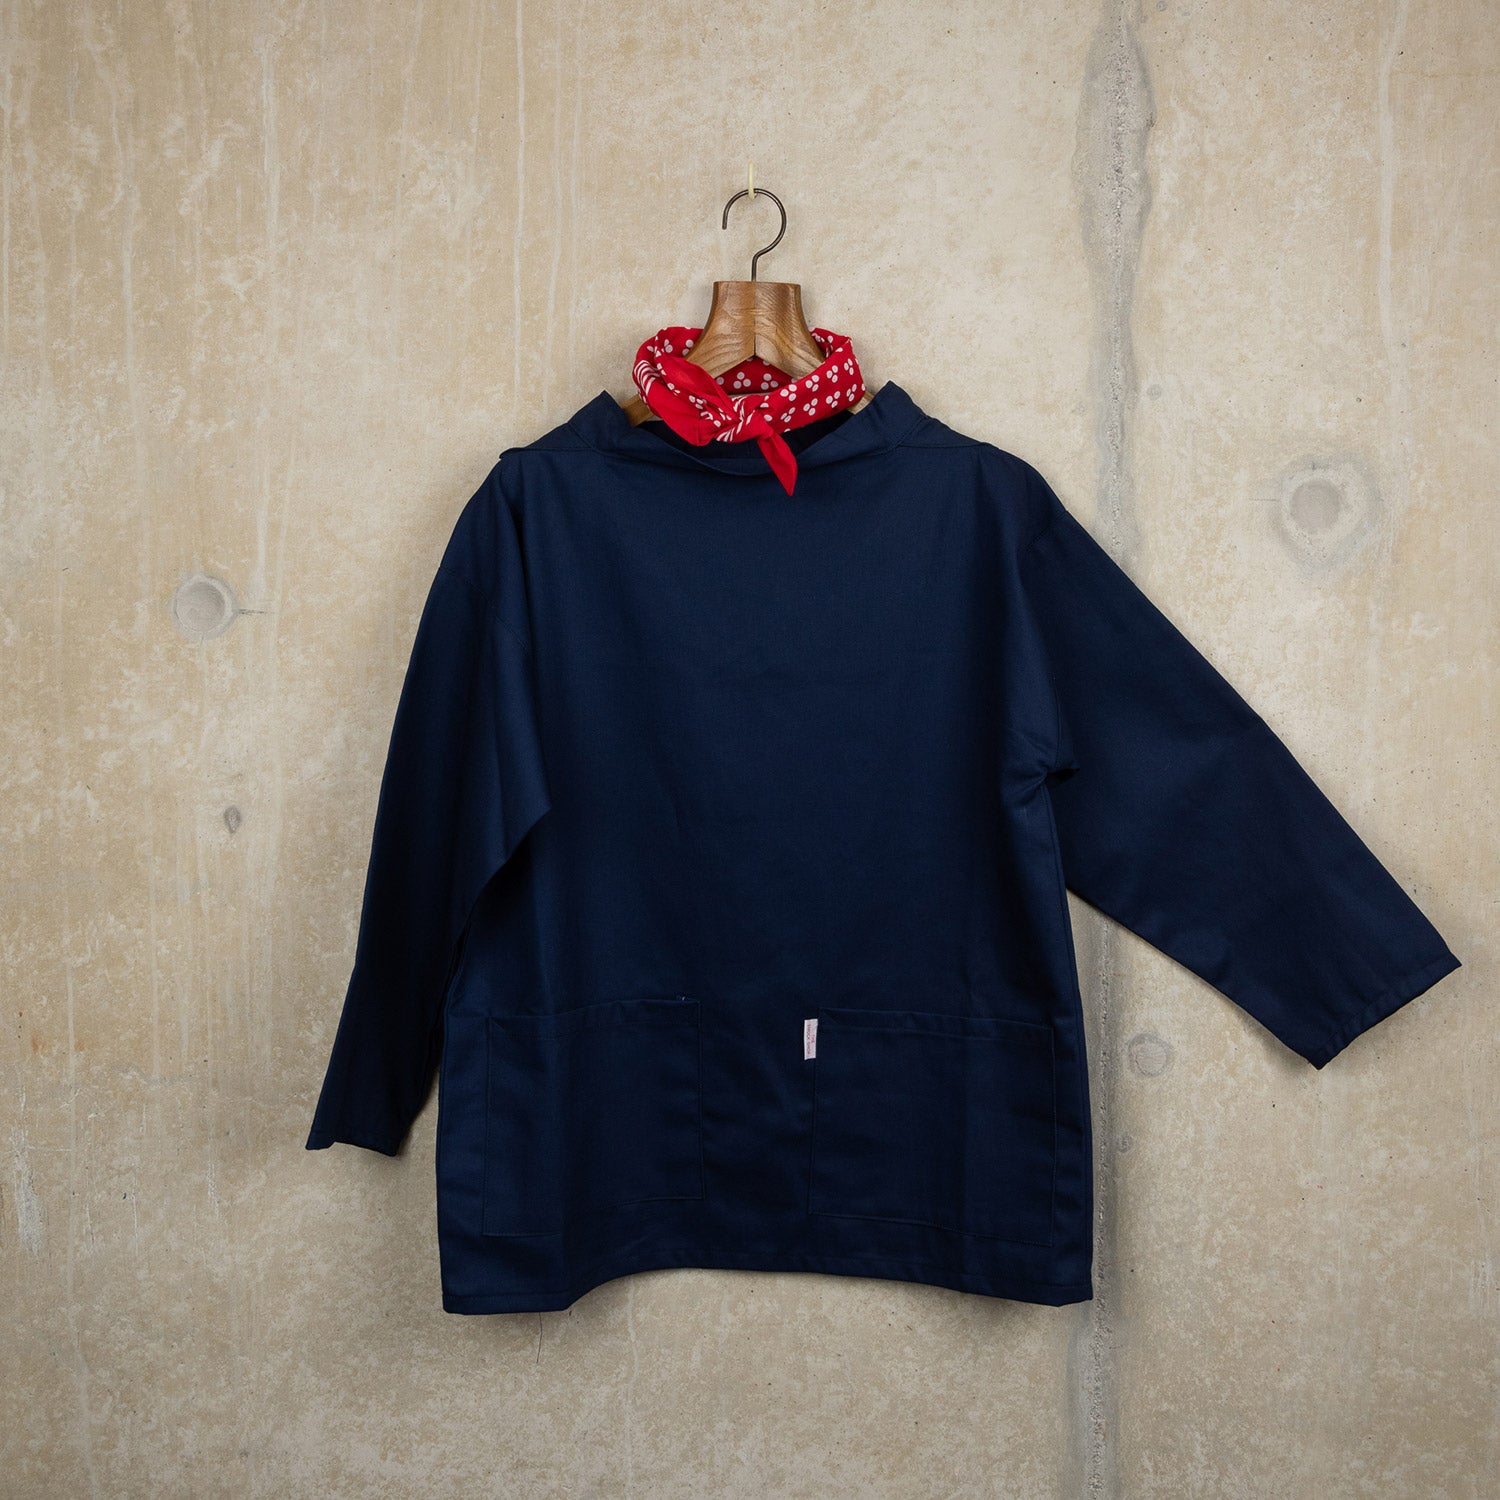 A blue adult smock on a coat hanger, pictured on a rustic concrete background.